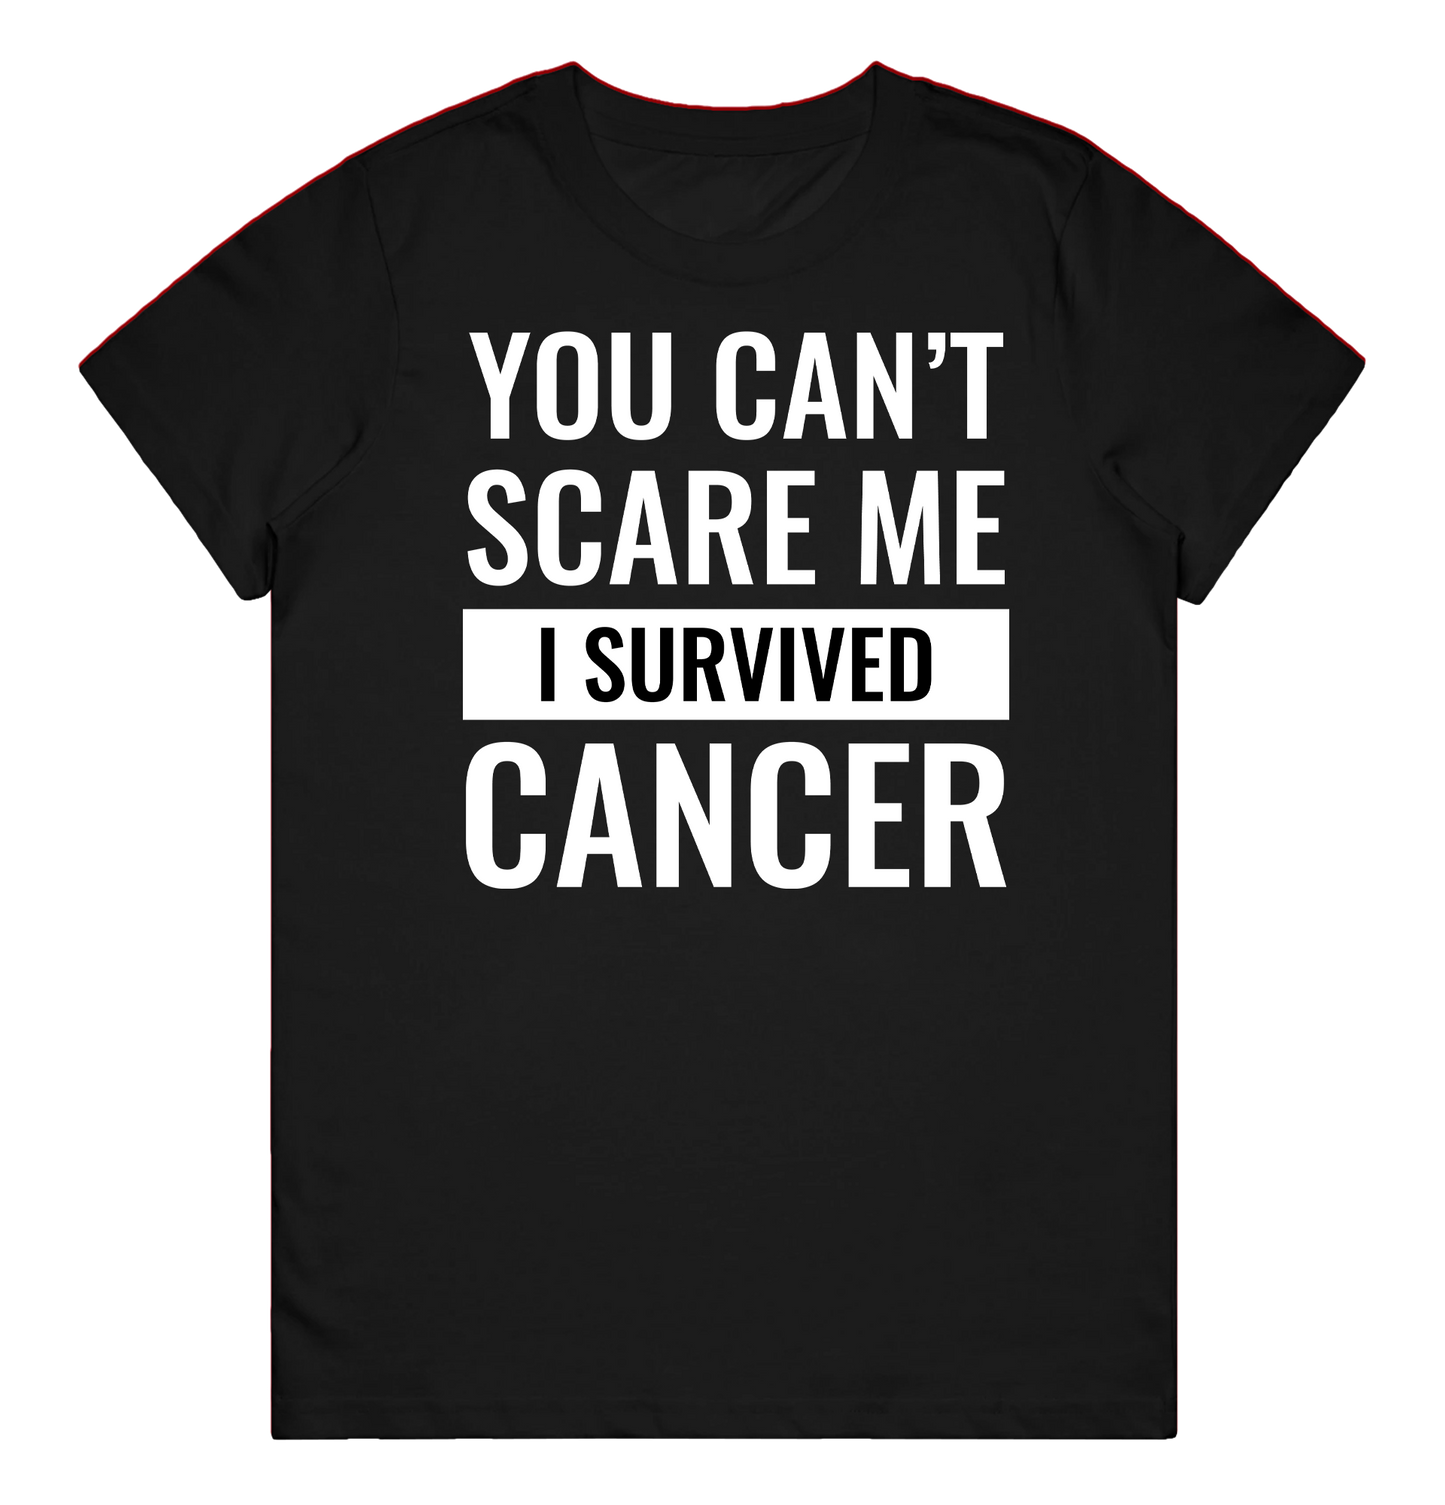 Women's T-Shirt - Can't Scare Me - Survived